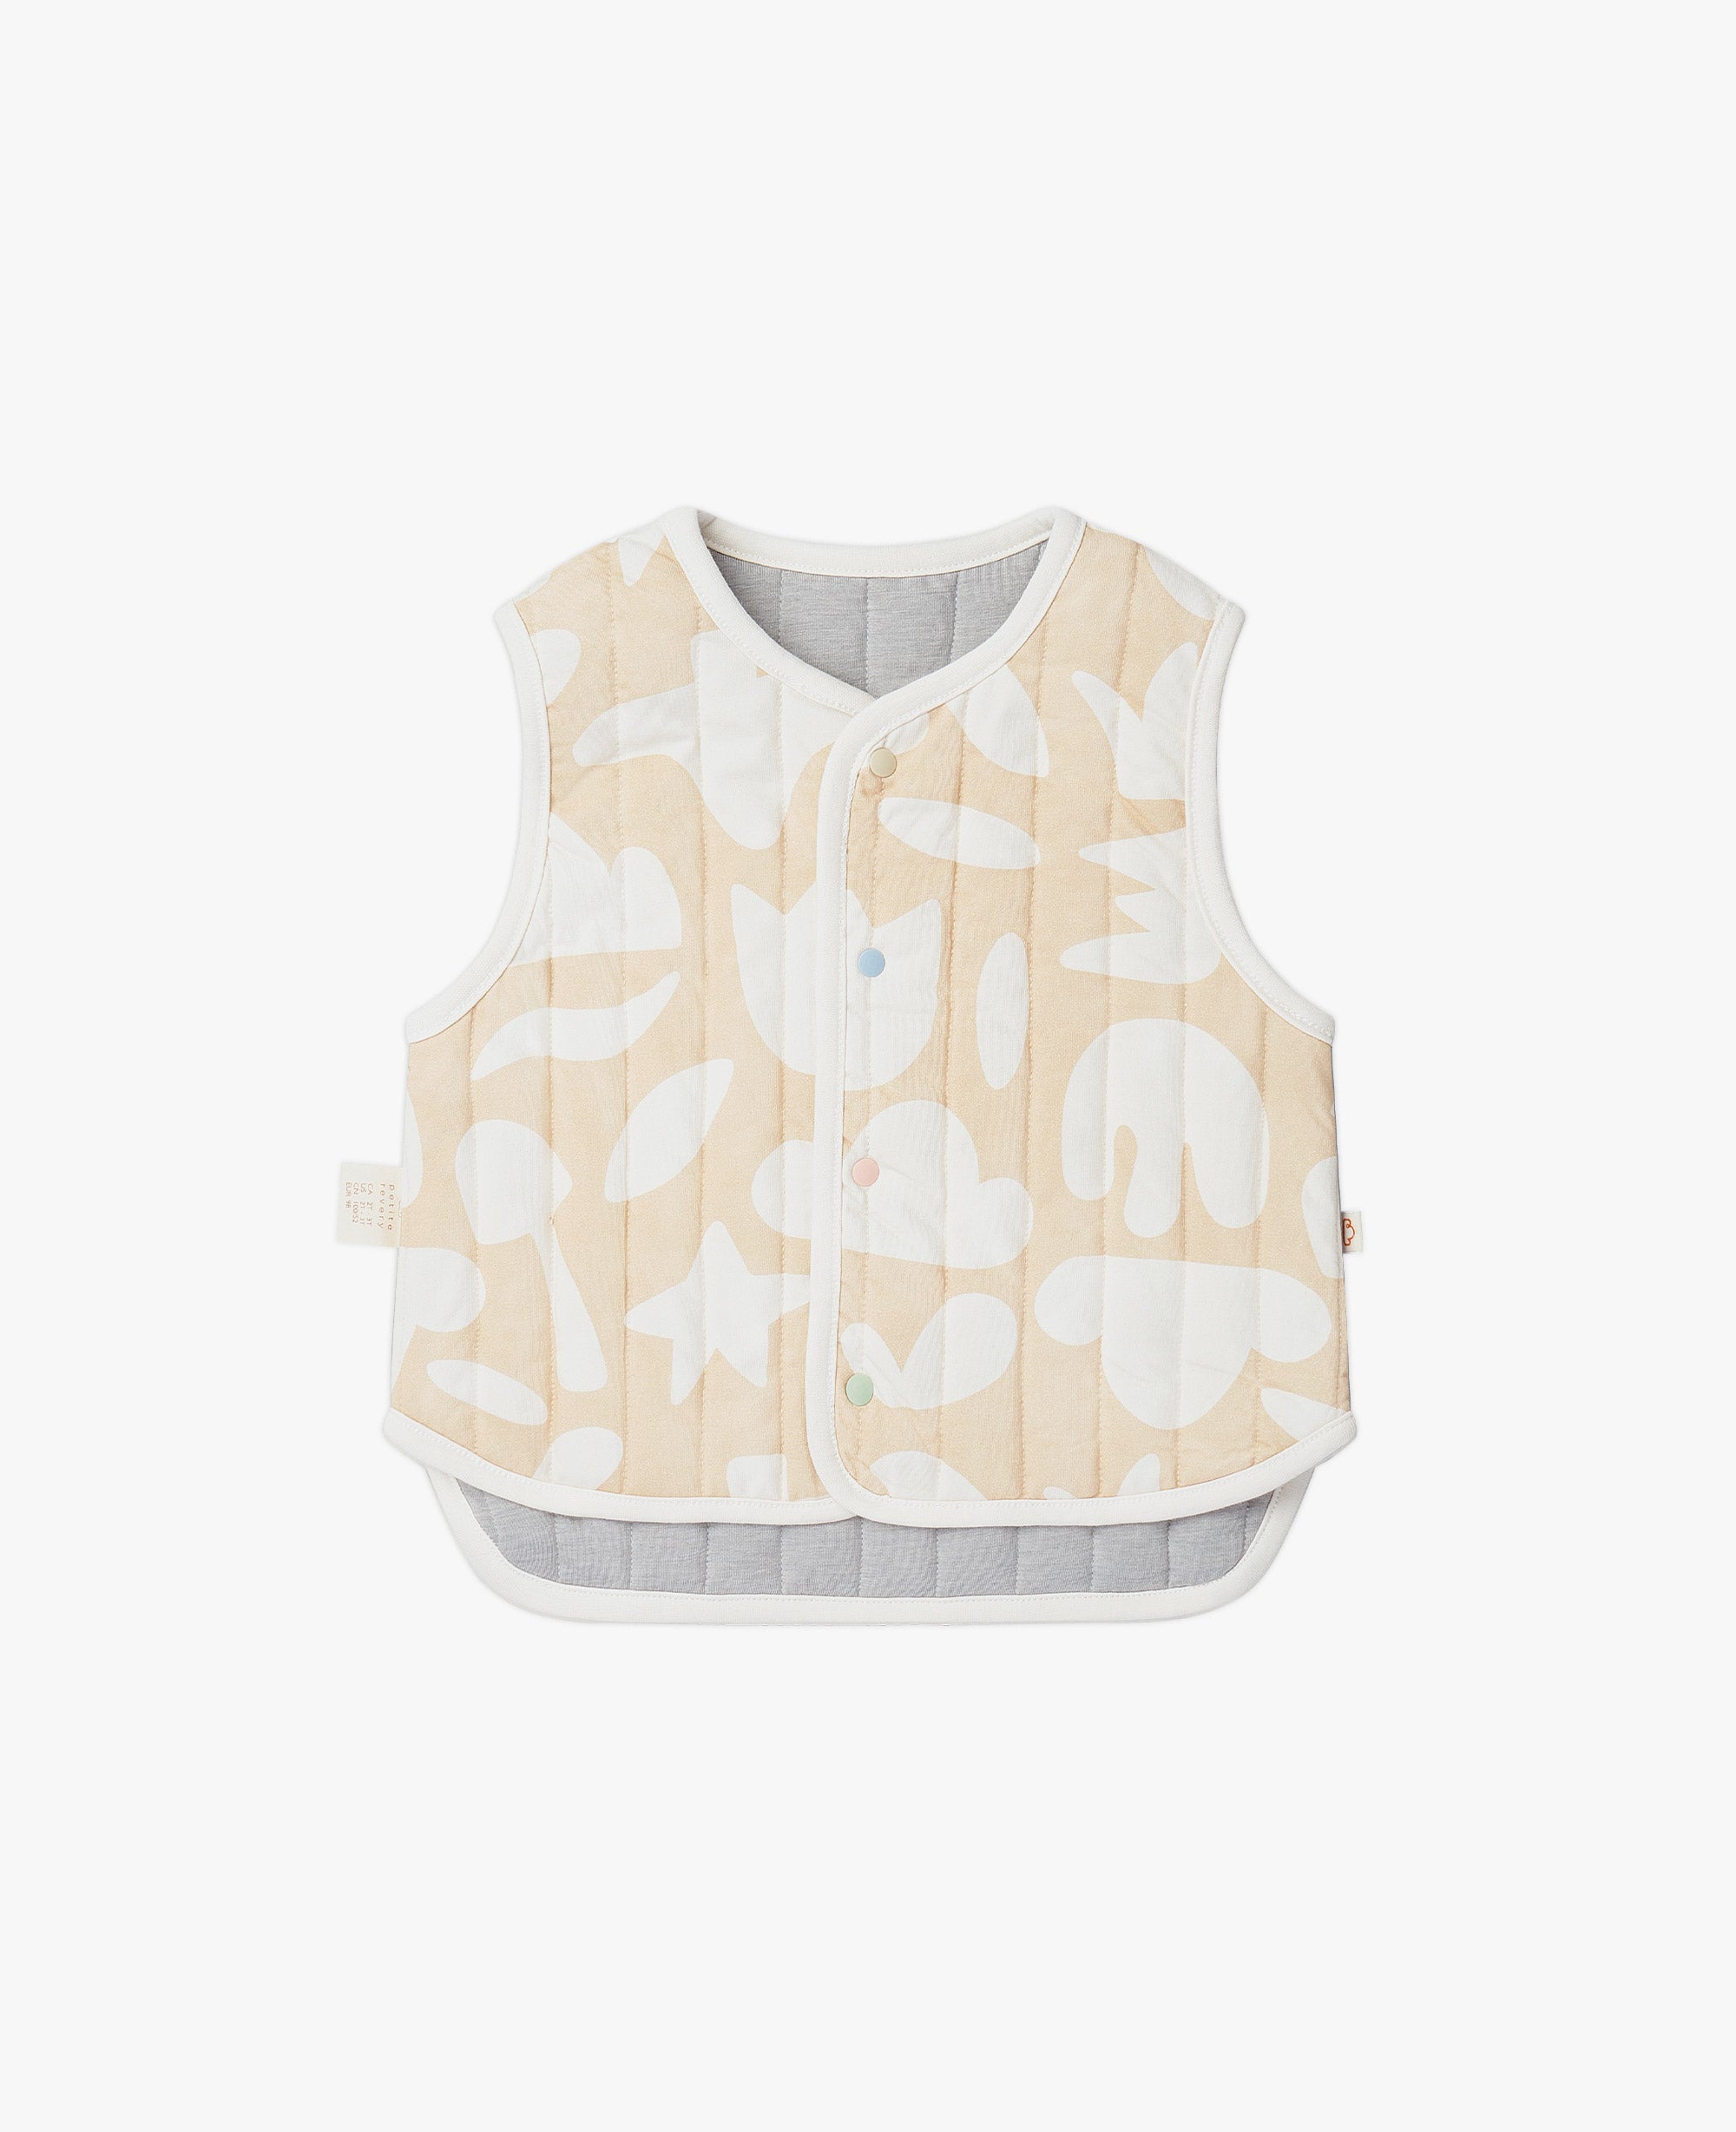 Reversible Quilted Vest - Slate Gray/Sunny Fields